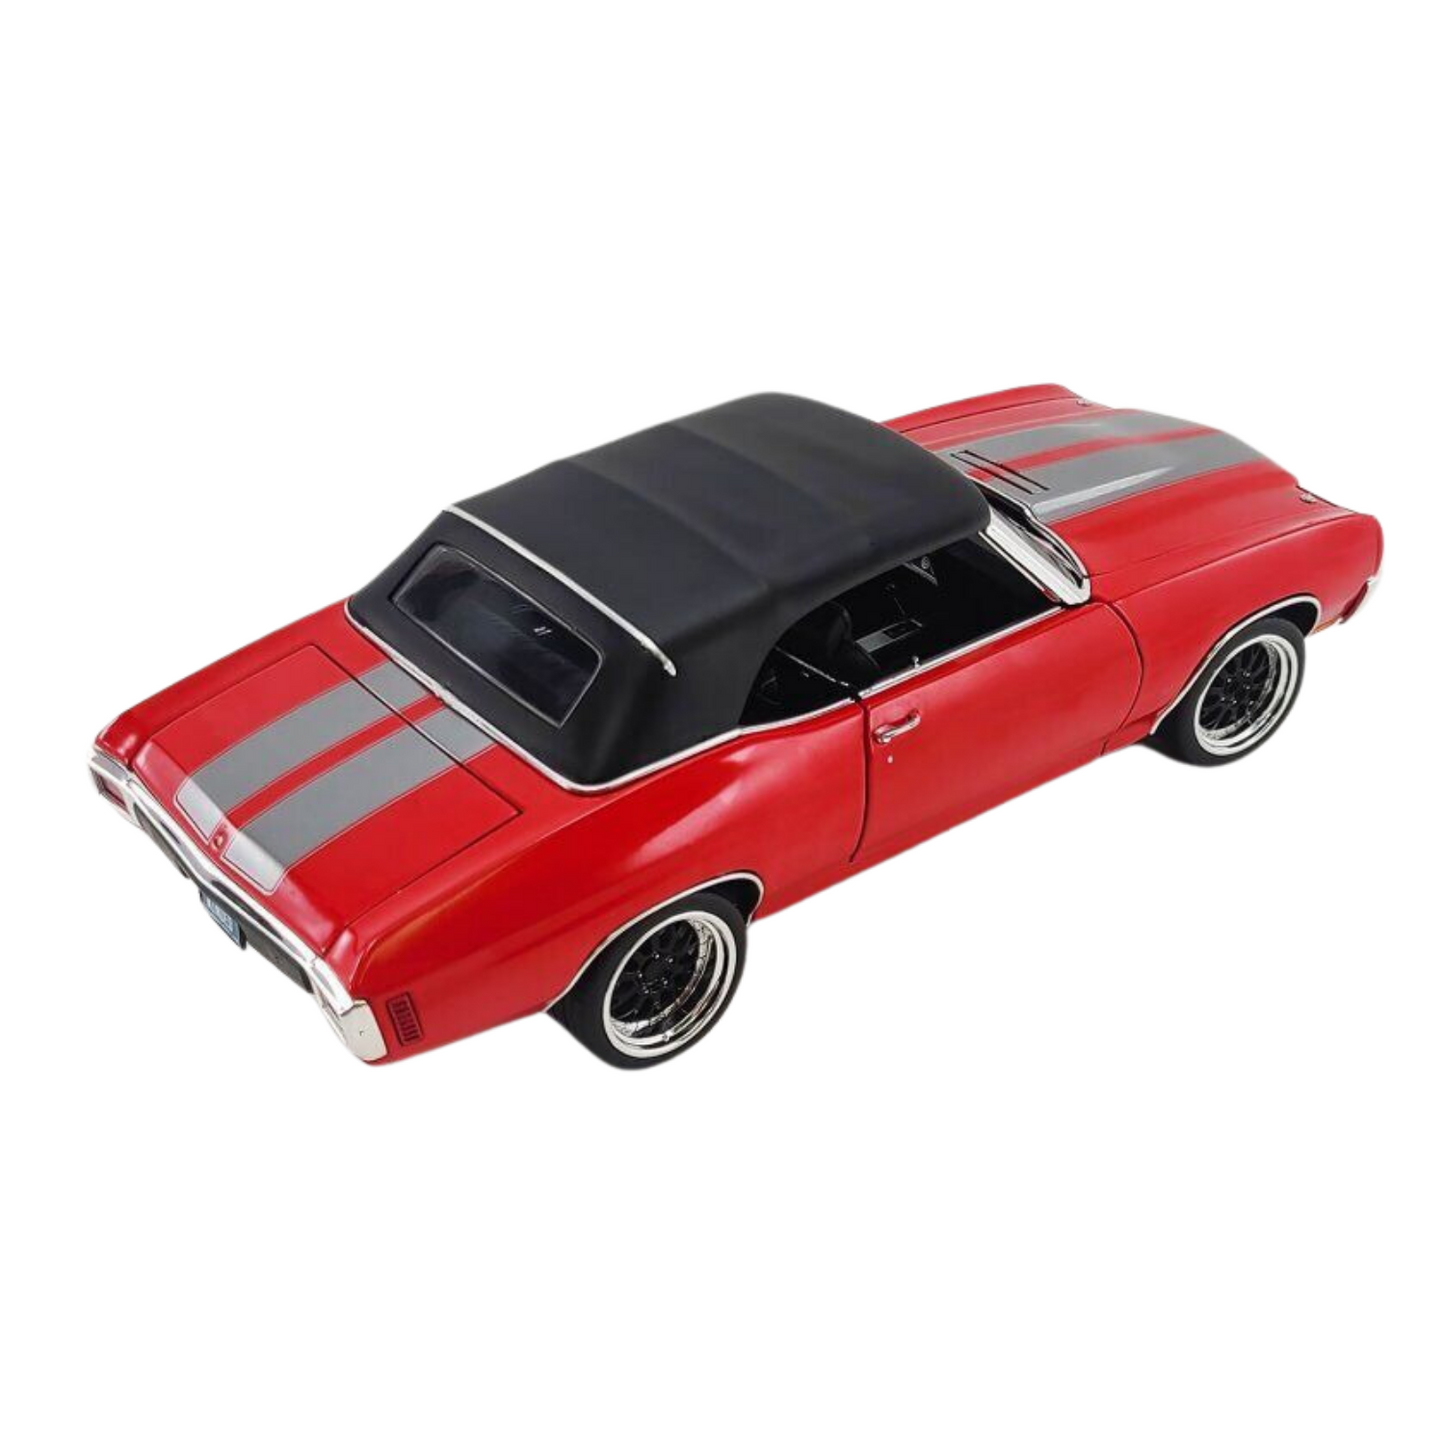 ACME 1970 Chevrolet Chevelle SS Restomod Red Limited Edition 1:18 Diecast